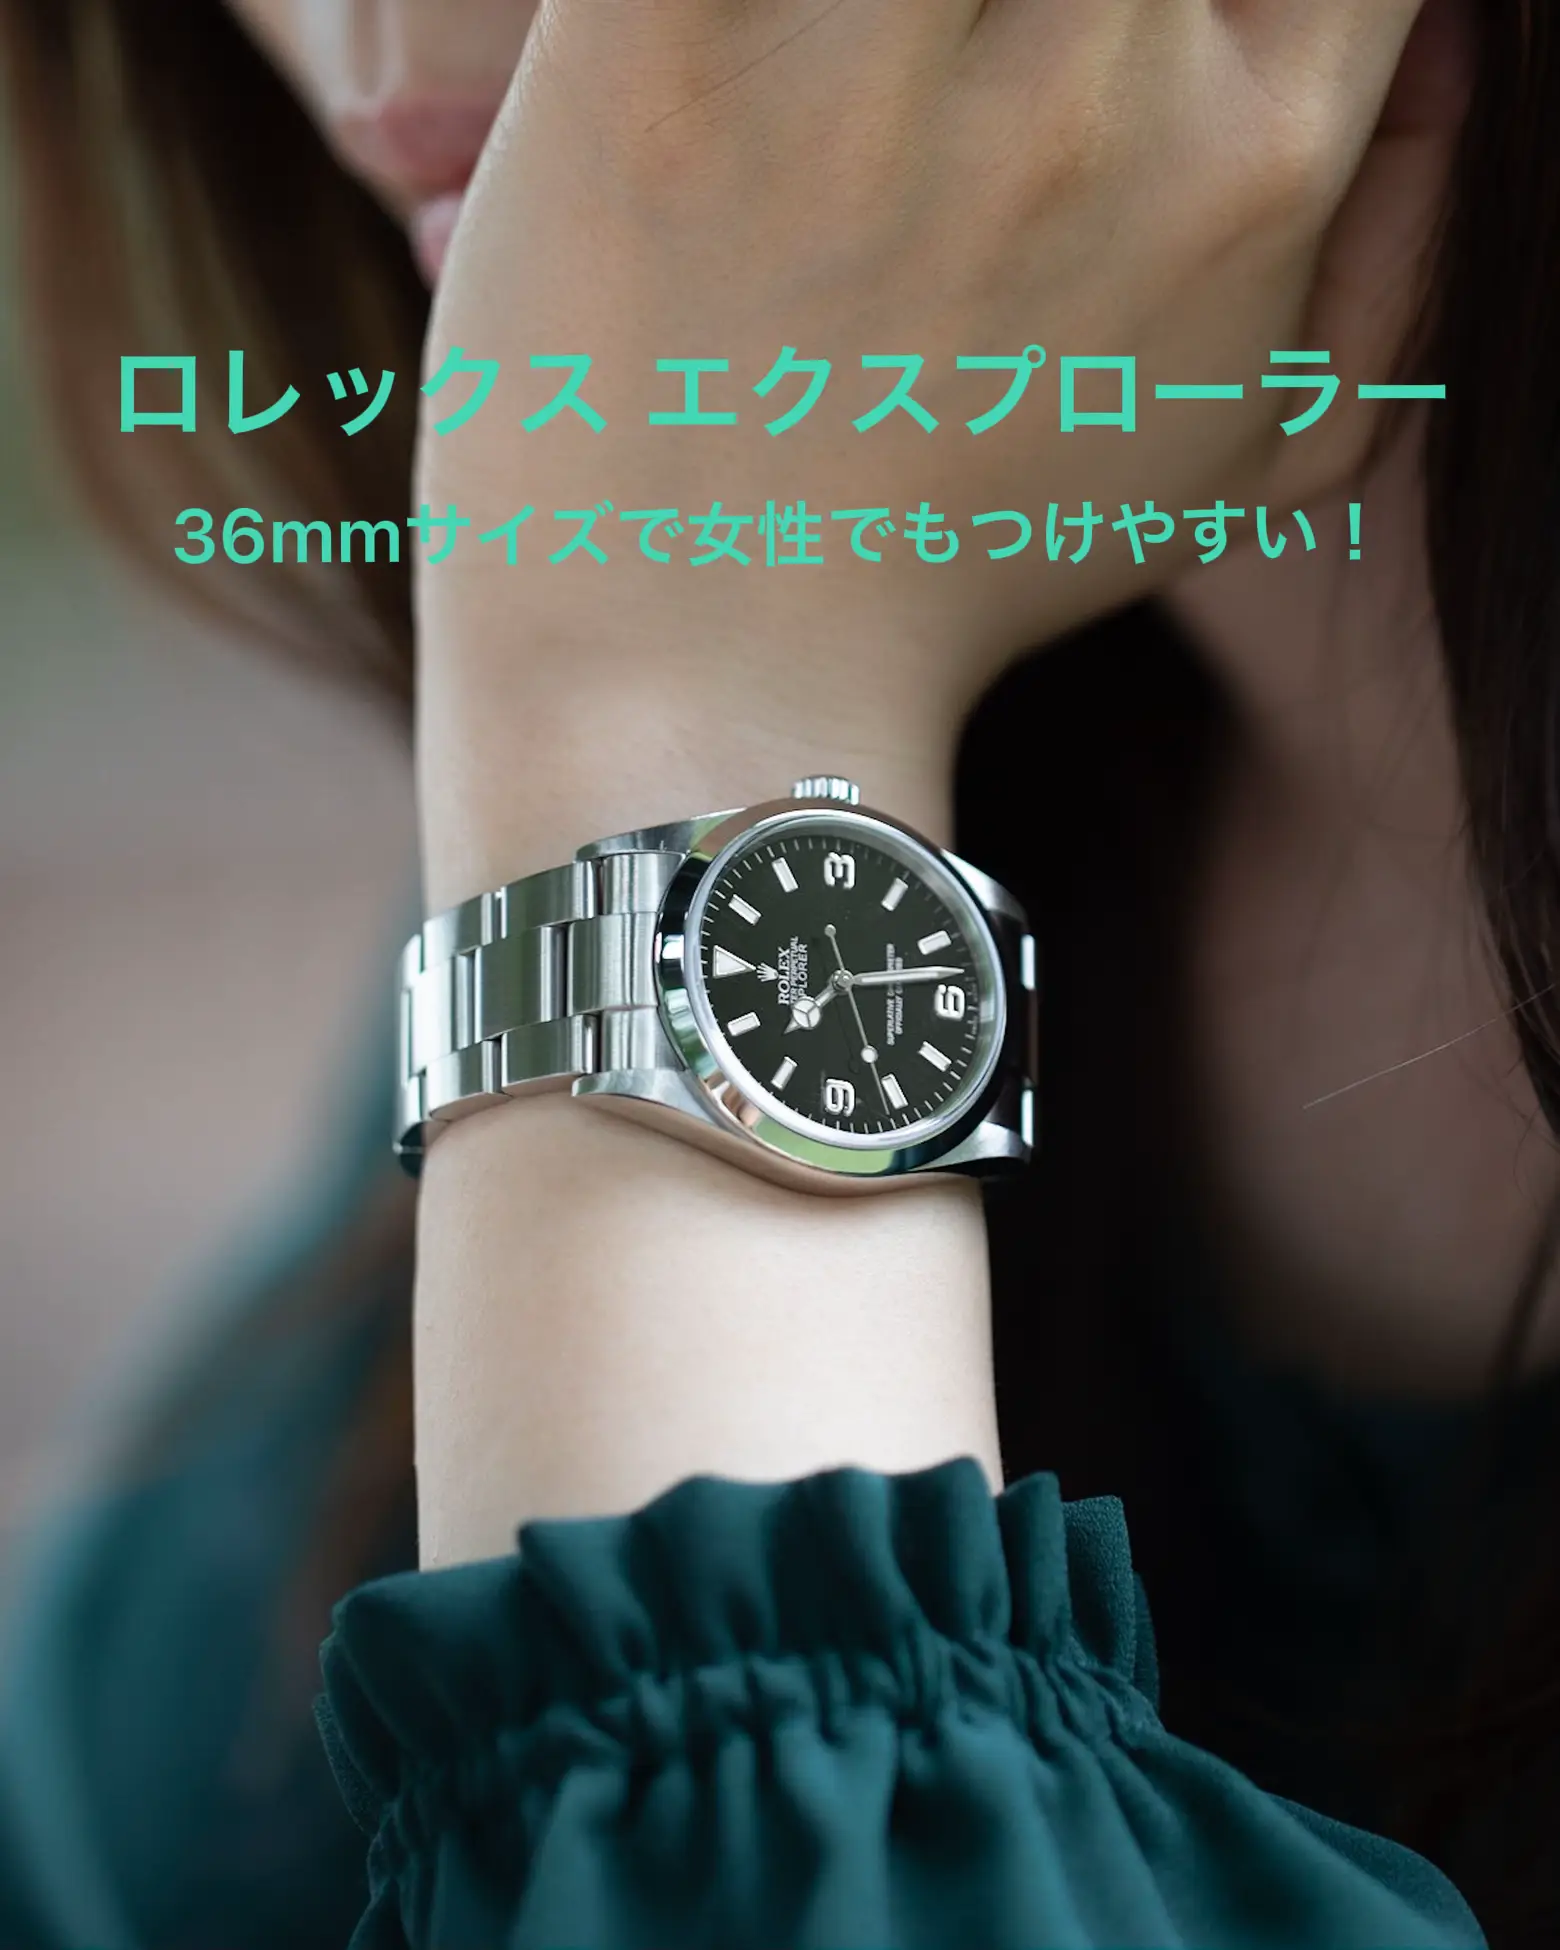 Rolex recommended for women | Gallery posted by マサハル | Lemon8